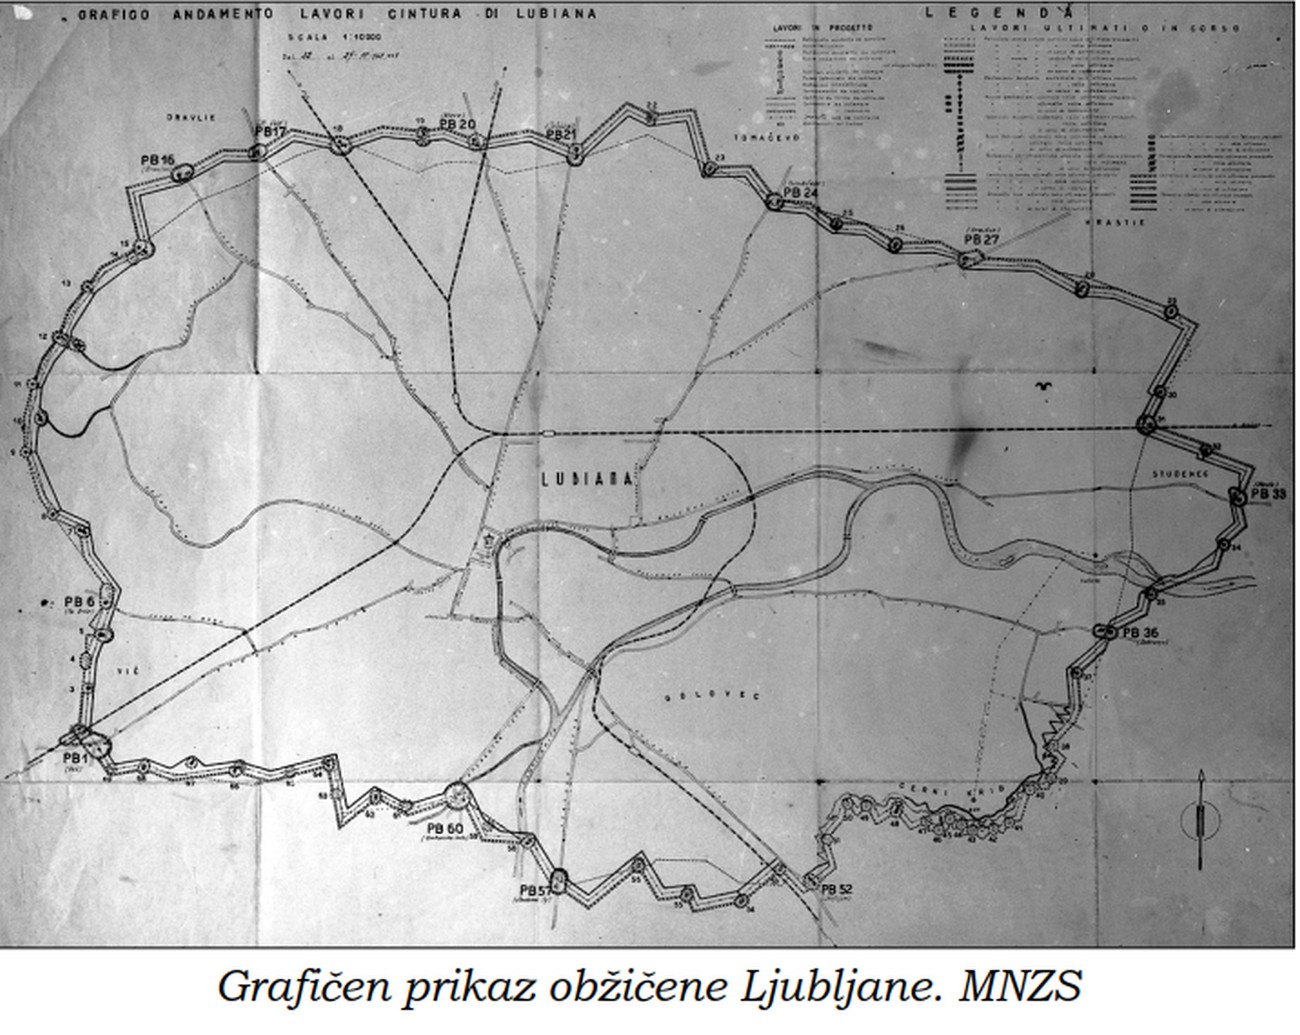 A map of the fortified zone around Ljubljana. The entire border zone was around 30km long, around 2 metres high and 5-8m wide. Together with the telephone and electrical wiring, the floodlight stations for illuminating the border, and a circular runway on the inner side of the zone, the fortified line was about 80m wide. In January 1943, the border was guarded by some 2,500 soldiers, 500 Carabinieri, public security agents, and Questurini who examined people at the road checkpoints. MNZS.